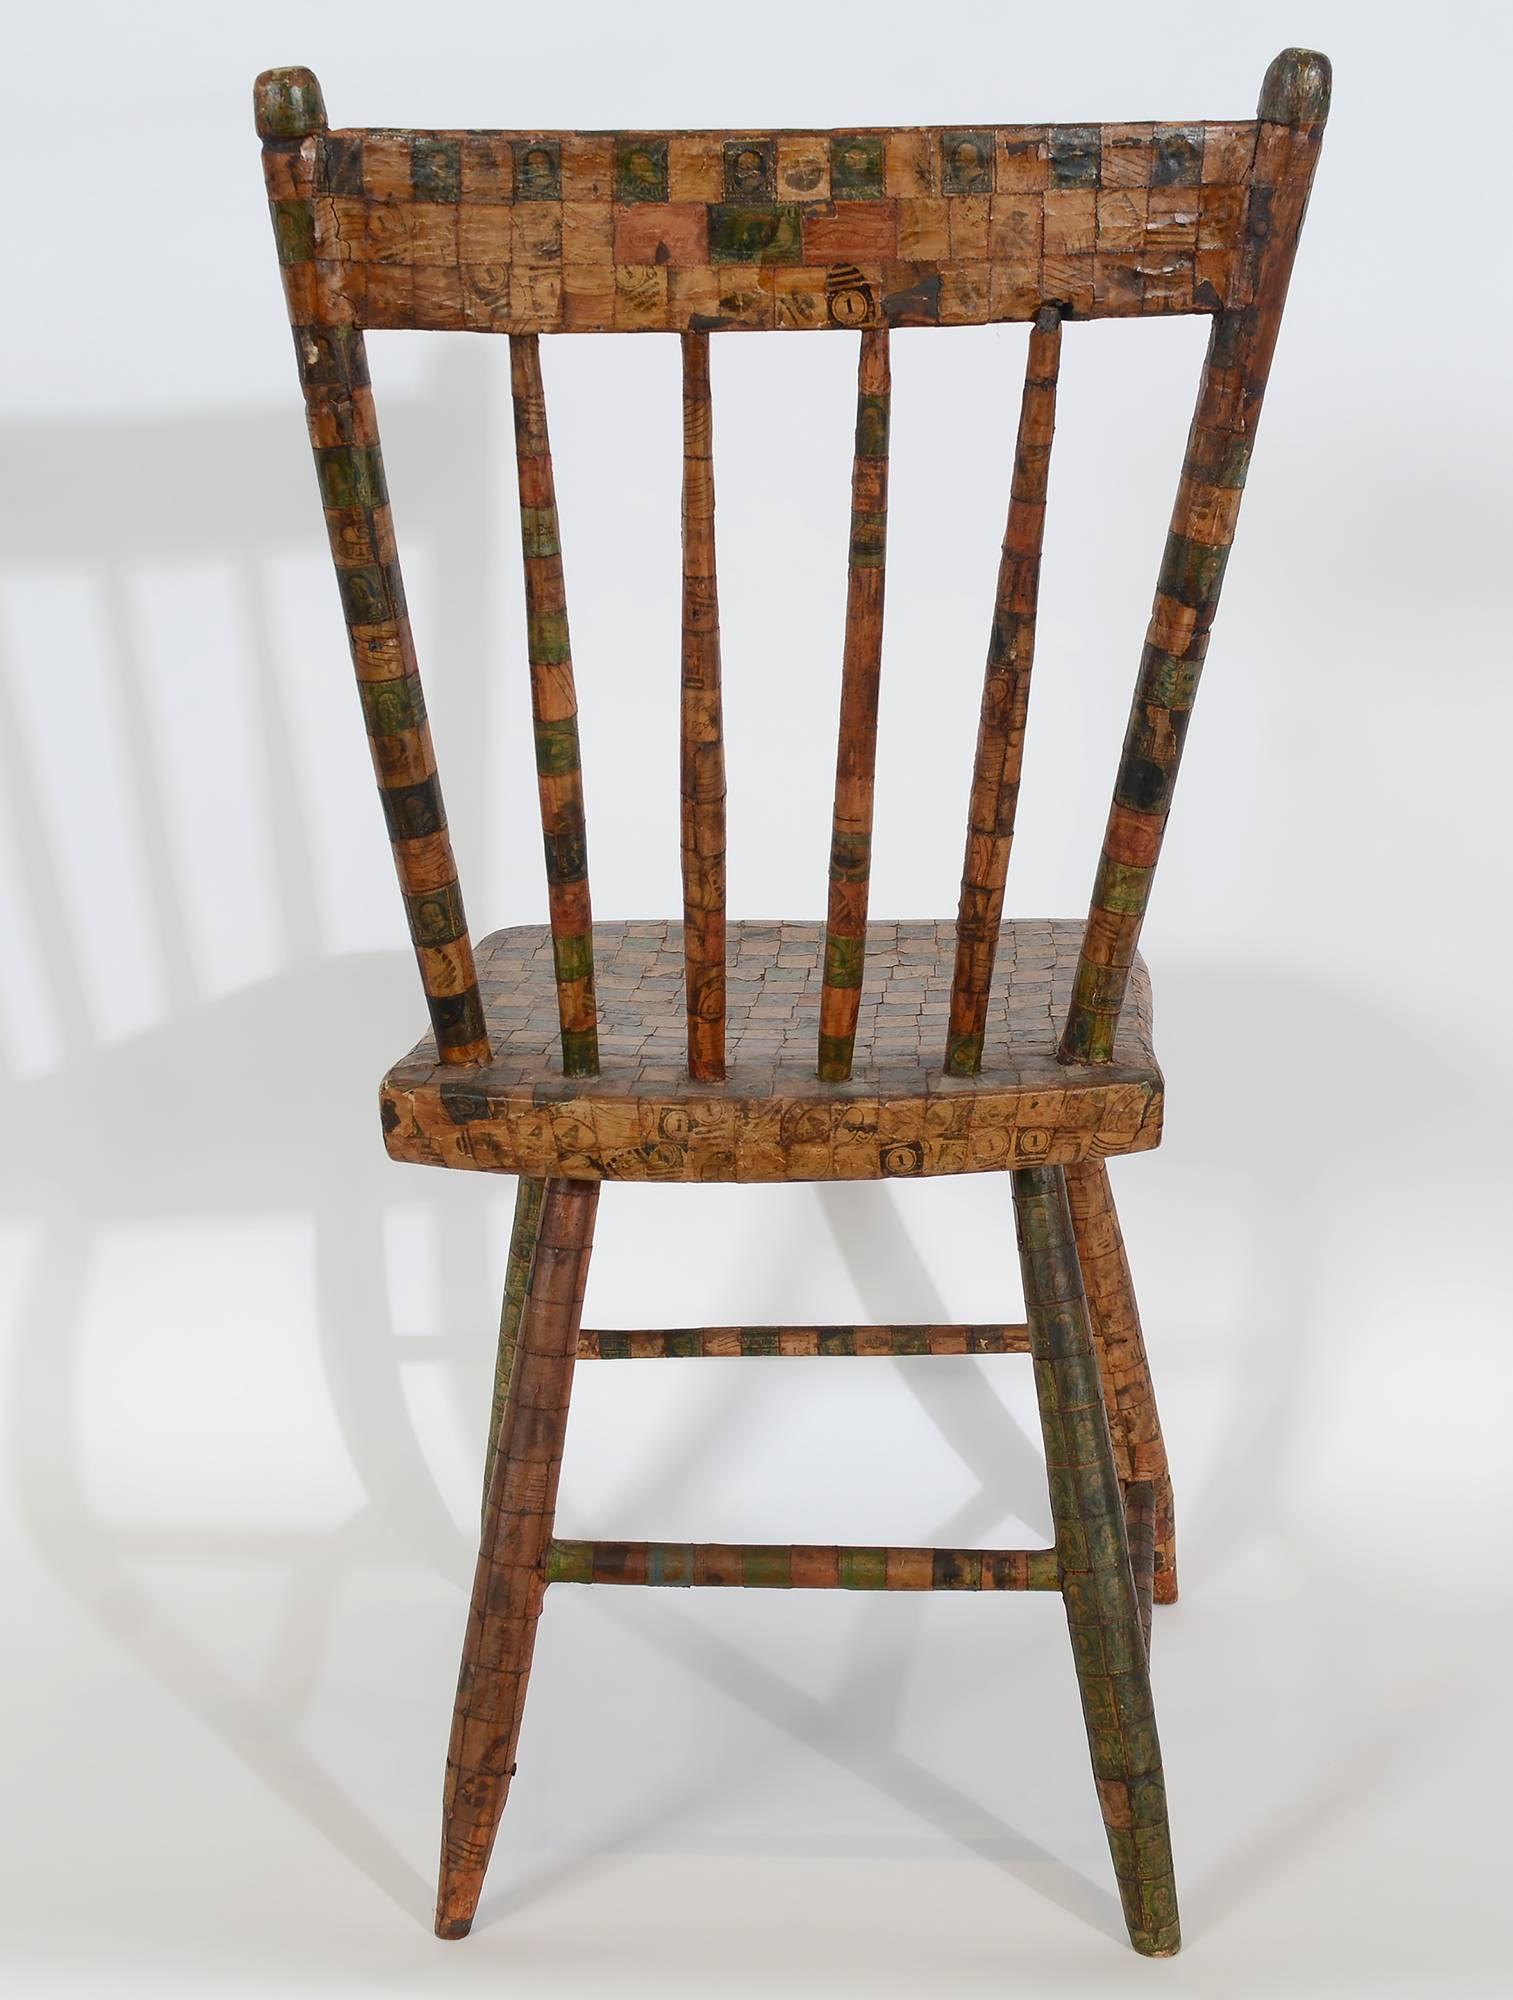 American Chair Covered in Postage Stamps